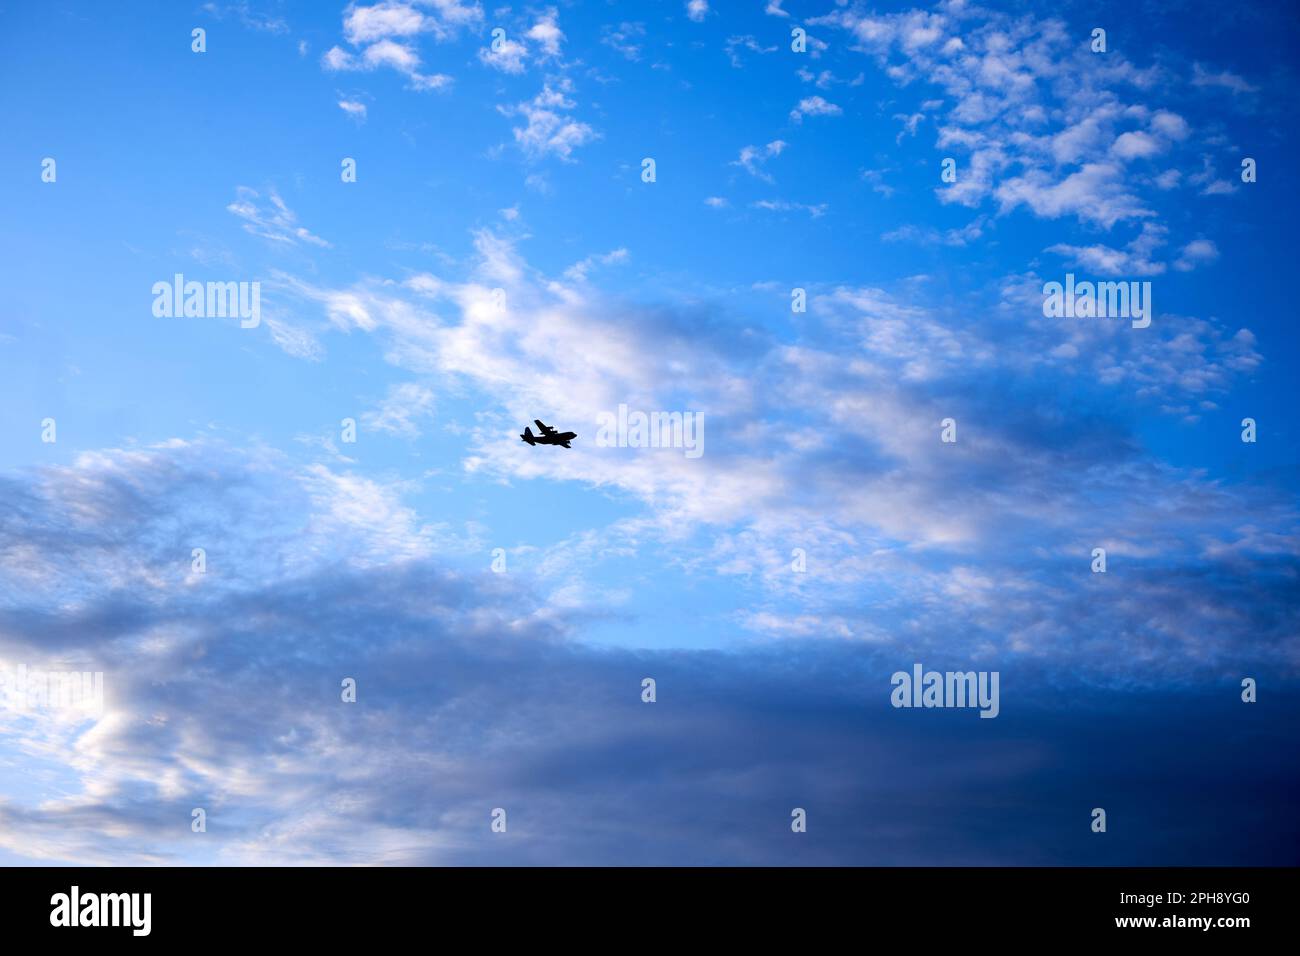 Captures a clear blue sky filled with fluffy white clouds, with a commercial airplane flying in the distance Stock Photo